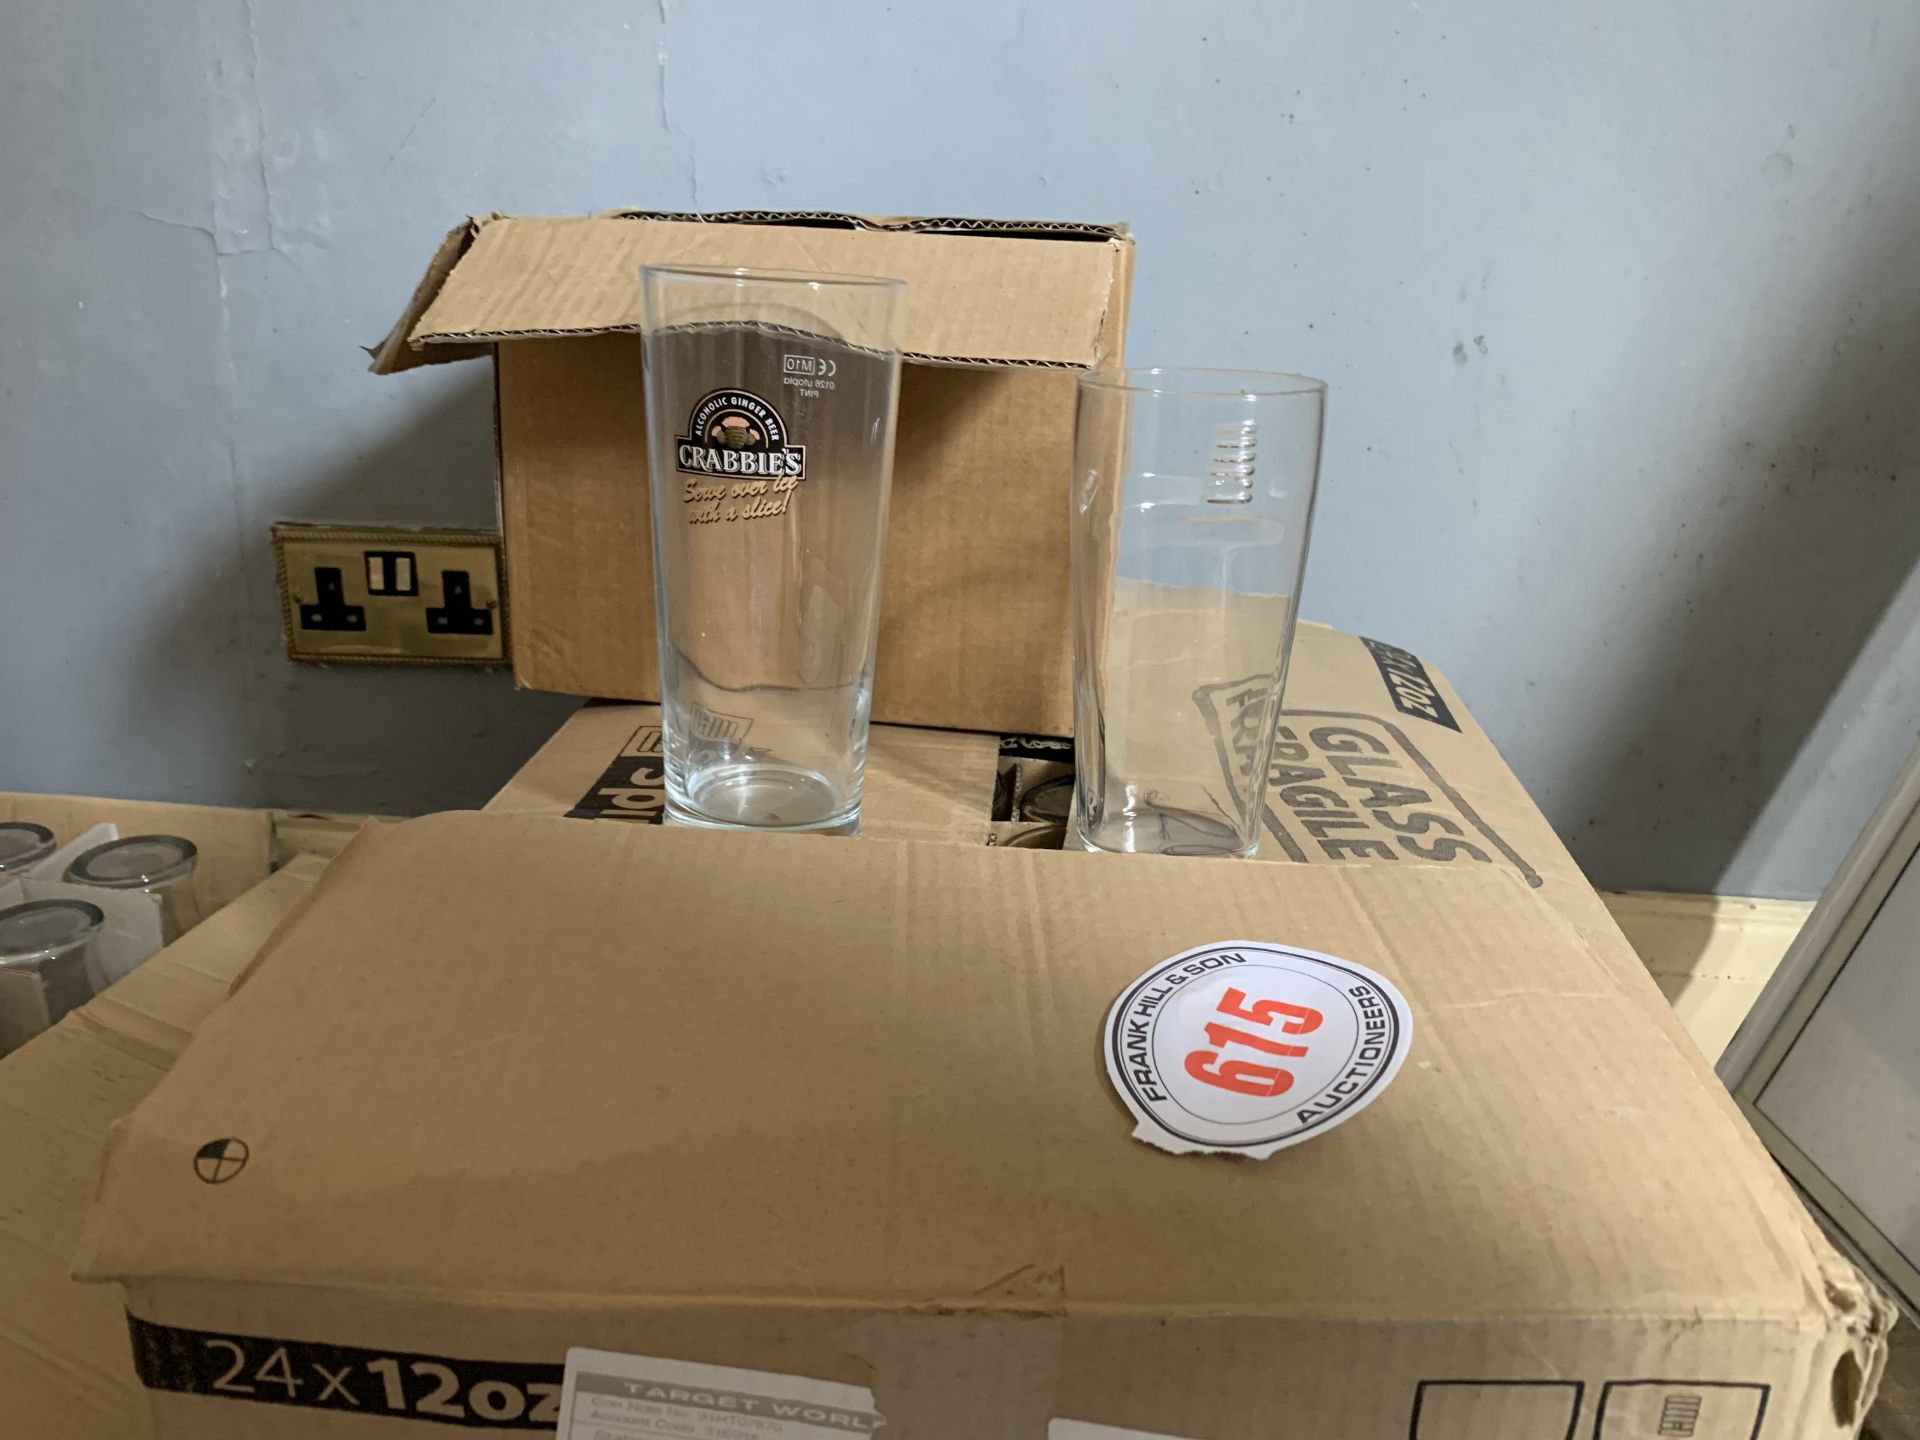 6 Crabbies pint glasses & 2 boxes of other glasses